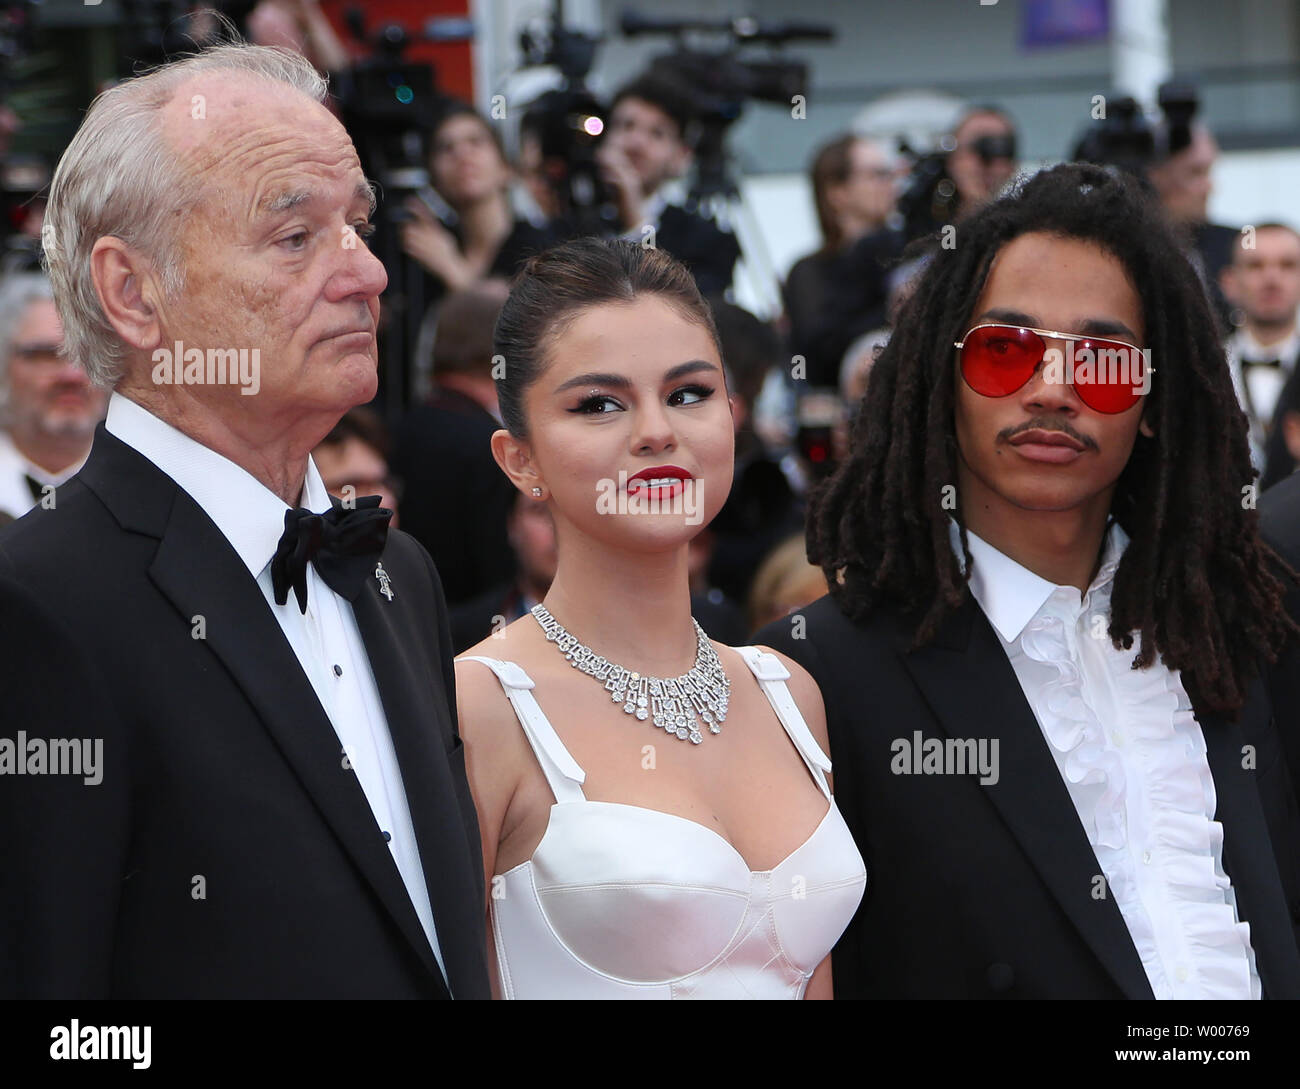 Bill Murray (L), Selena Gomez (C) and Luka Sabbat arrive on the red carpet before the screening of the film 'The Dead Don't Die' at the opening of the 72nd annual Cannes International Film Festival in Cannes, France on May 14, 2019.  Photo by David Silpa/UPI Stock Photo